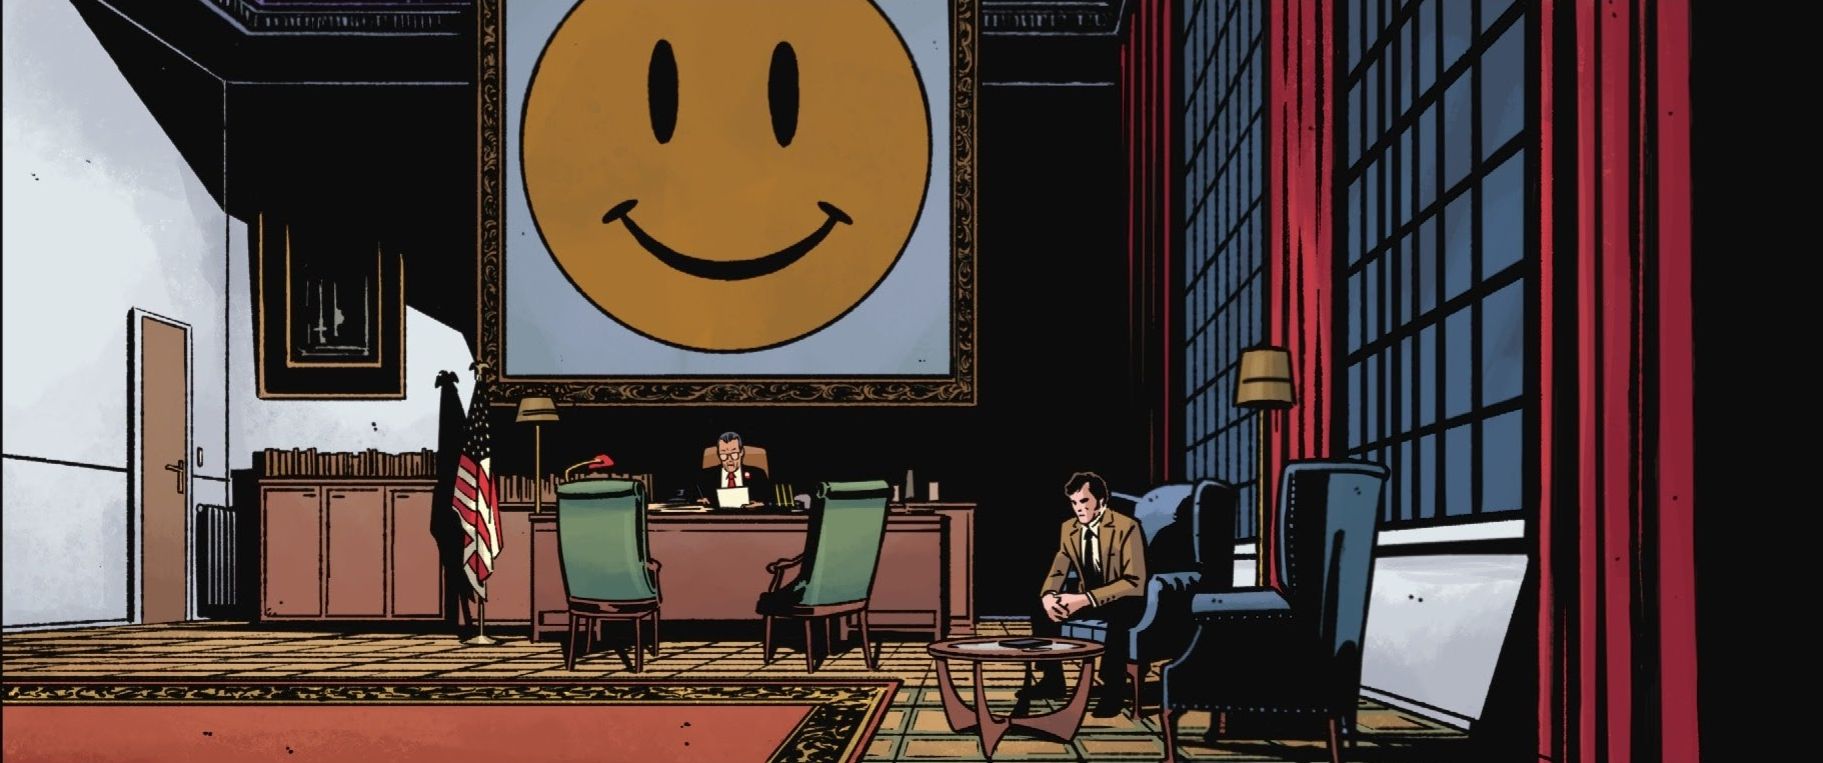 The investigator sits in Governor Turley's office in Rorschach 12